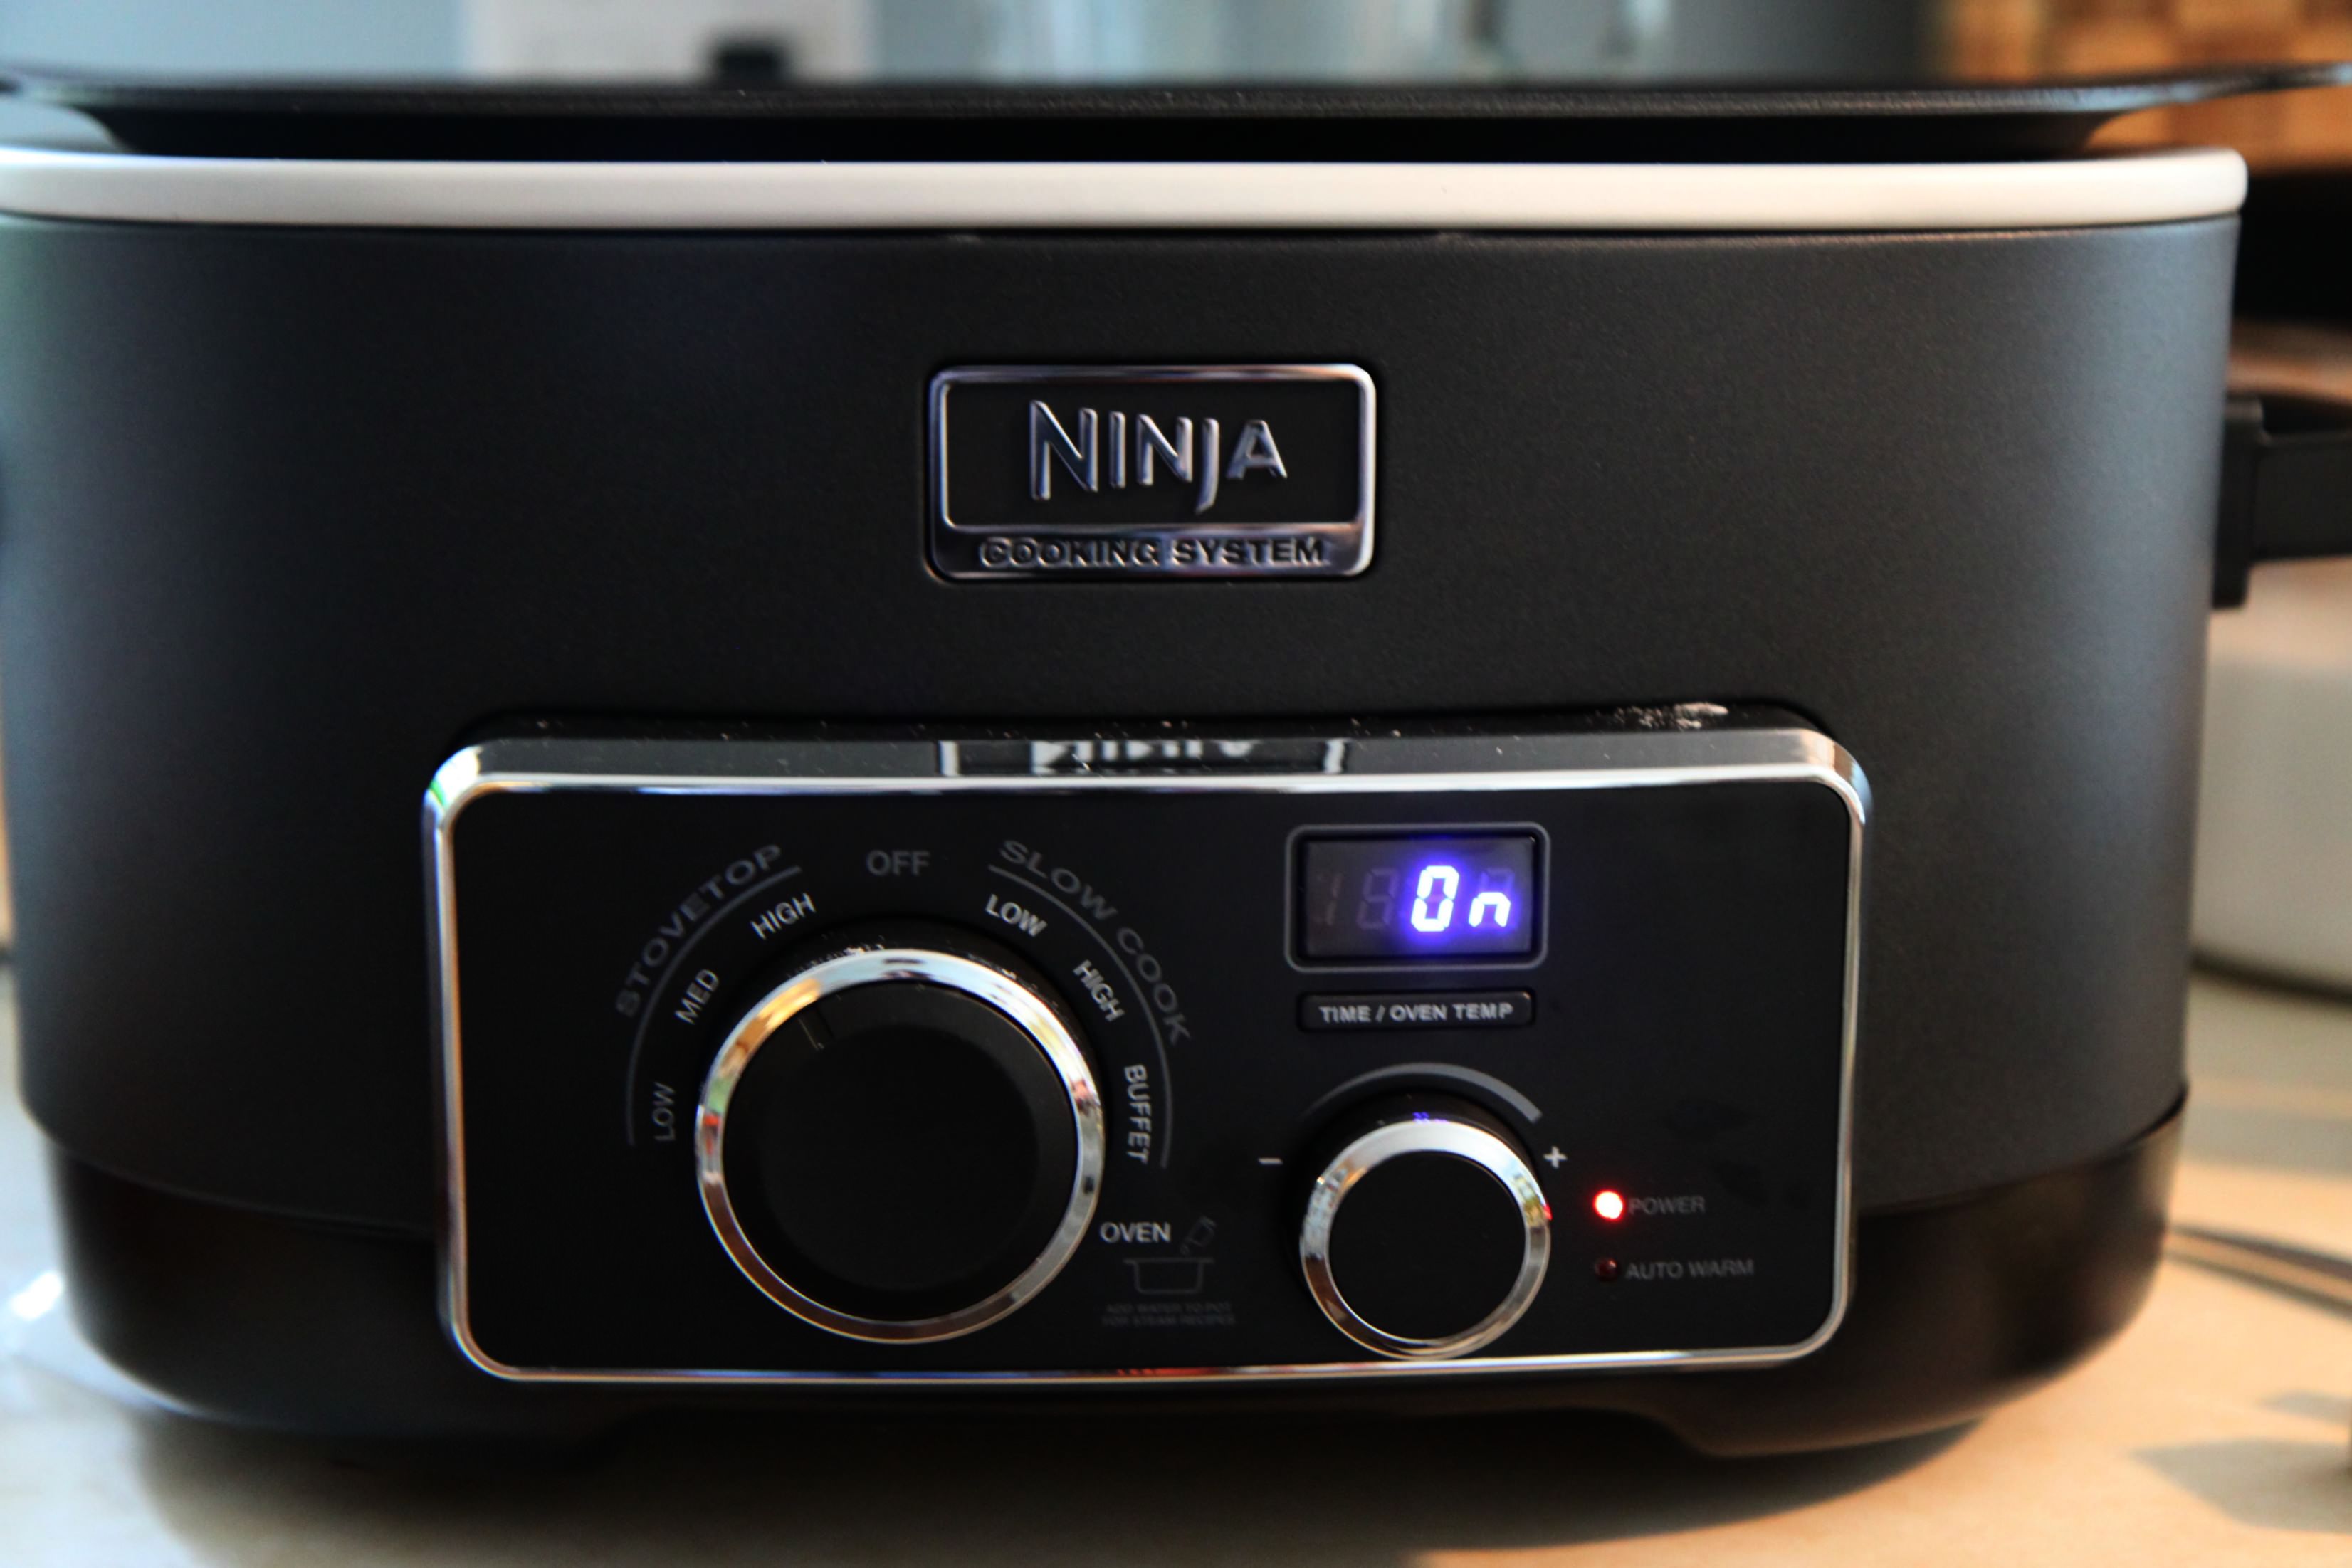 Giveaway Closed: Ninja Cooking System : Review & ...